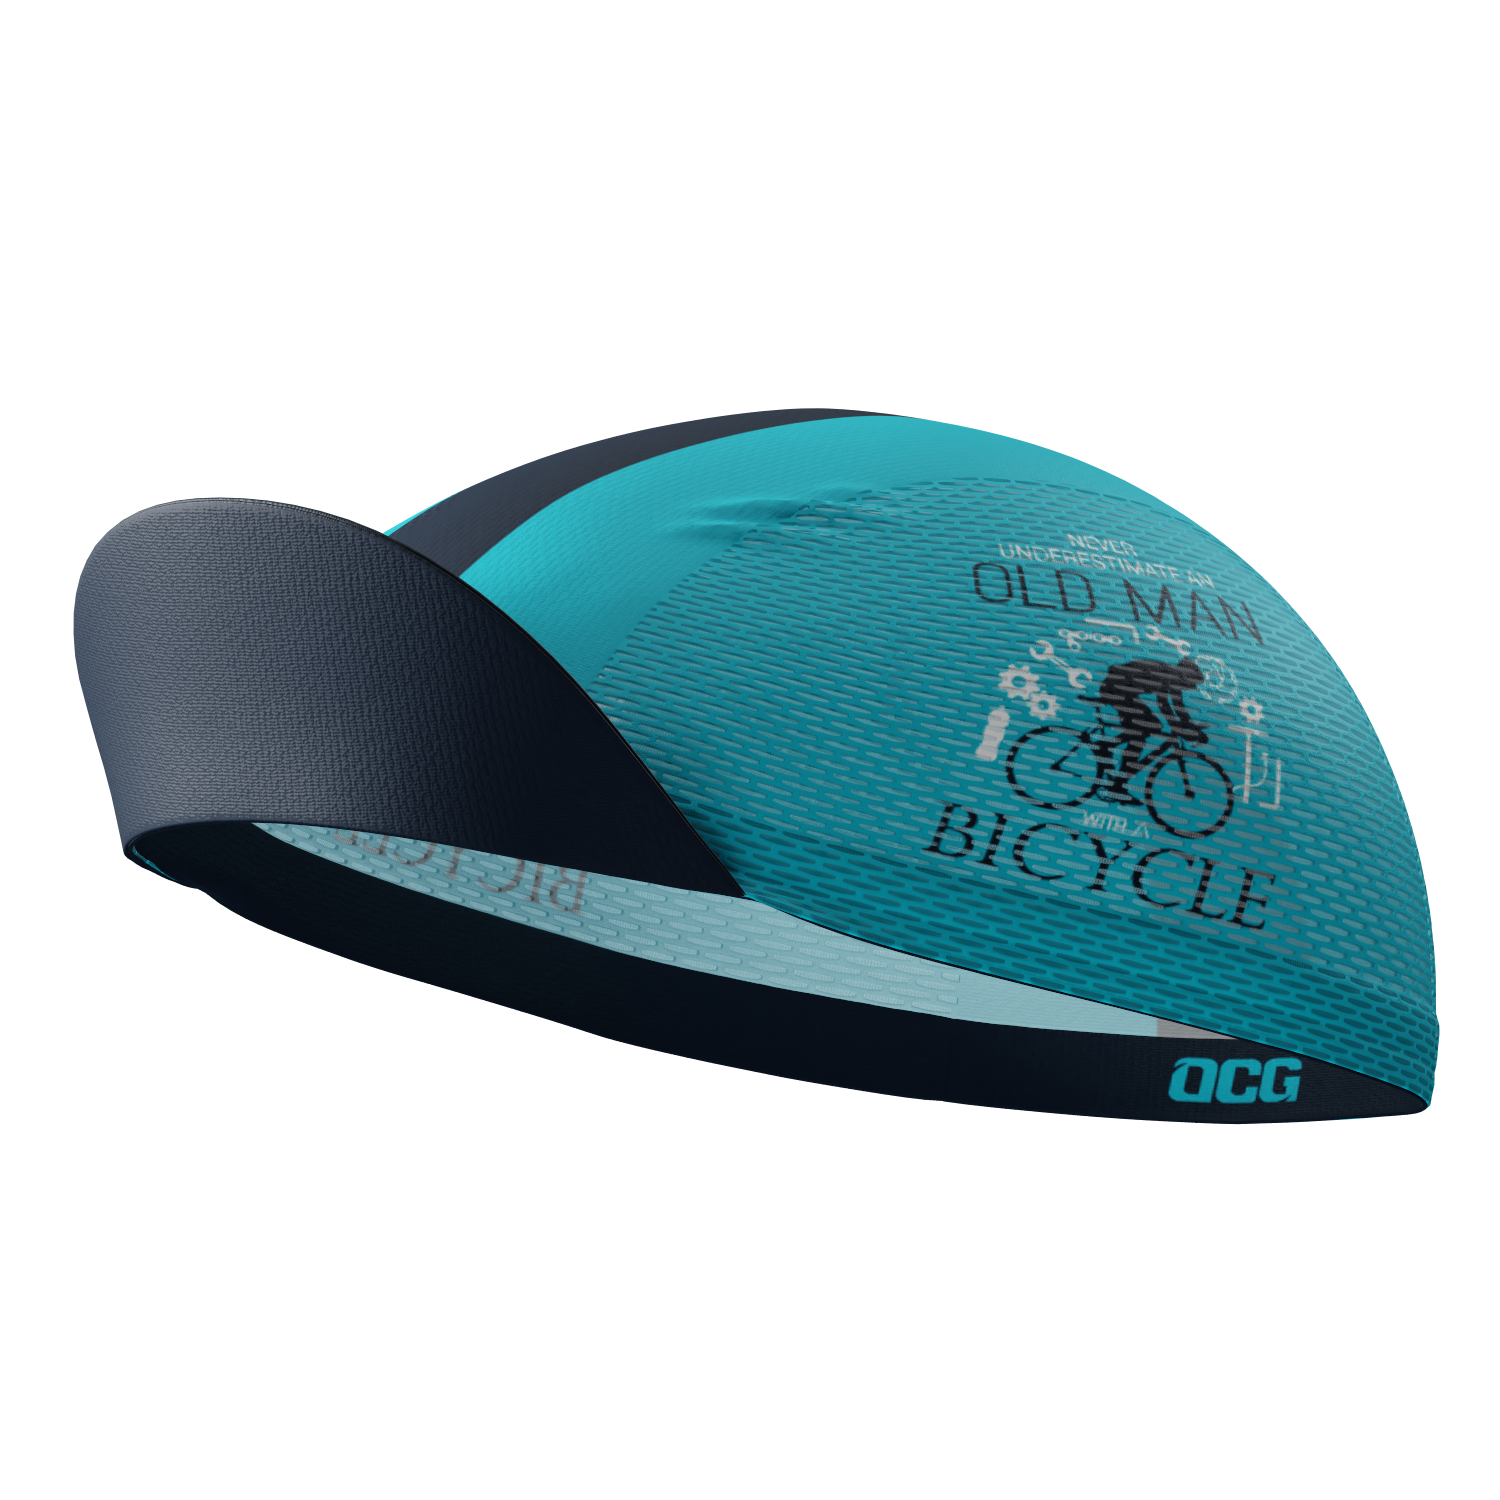 Unisex Old Man Bicycle Cycling Cap Quick-Dry Cycling Cap